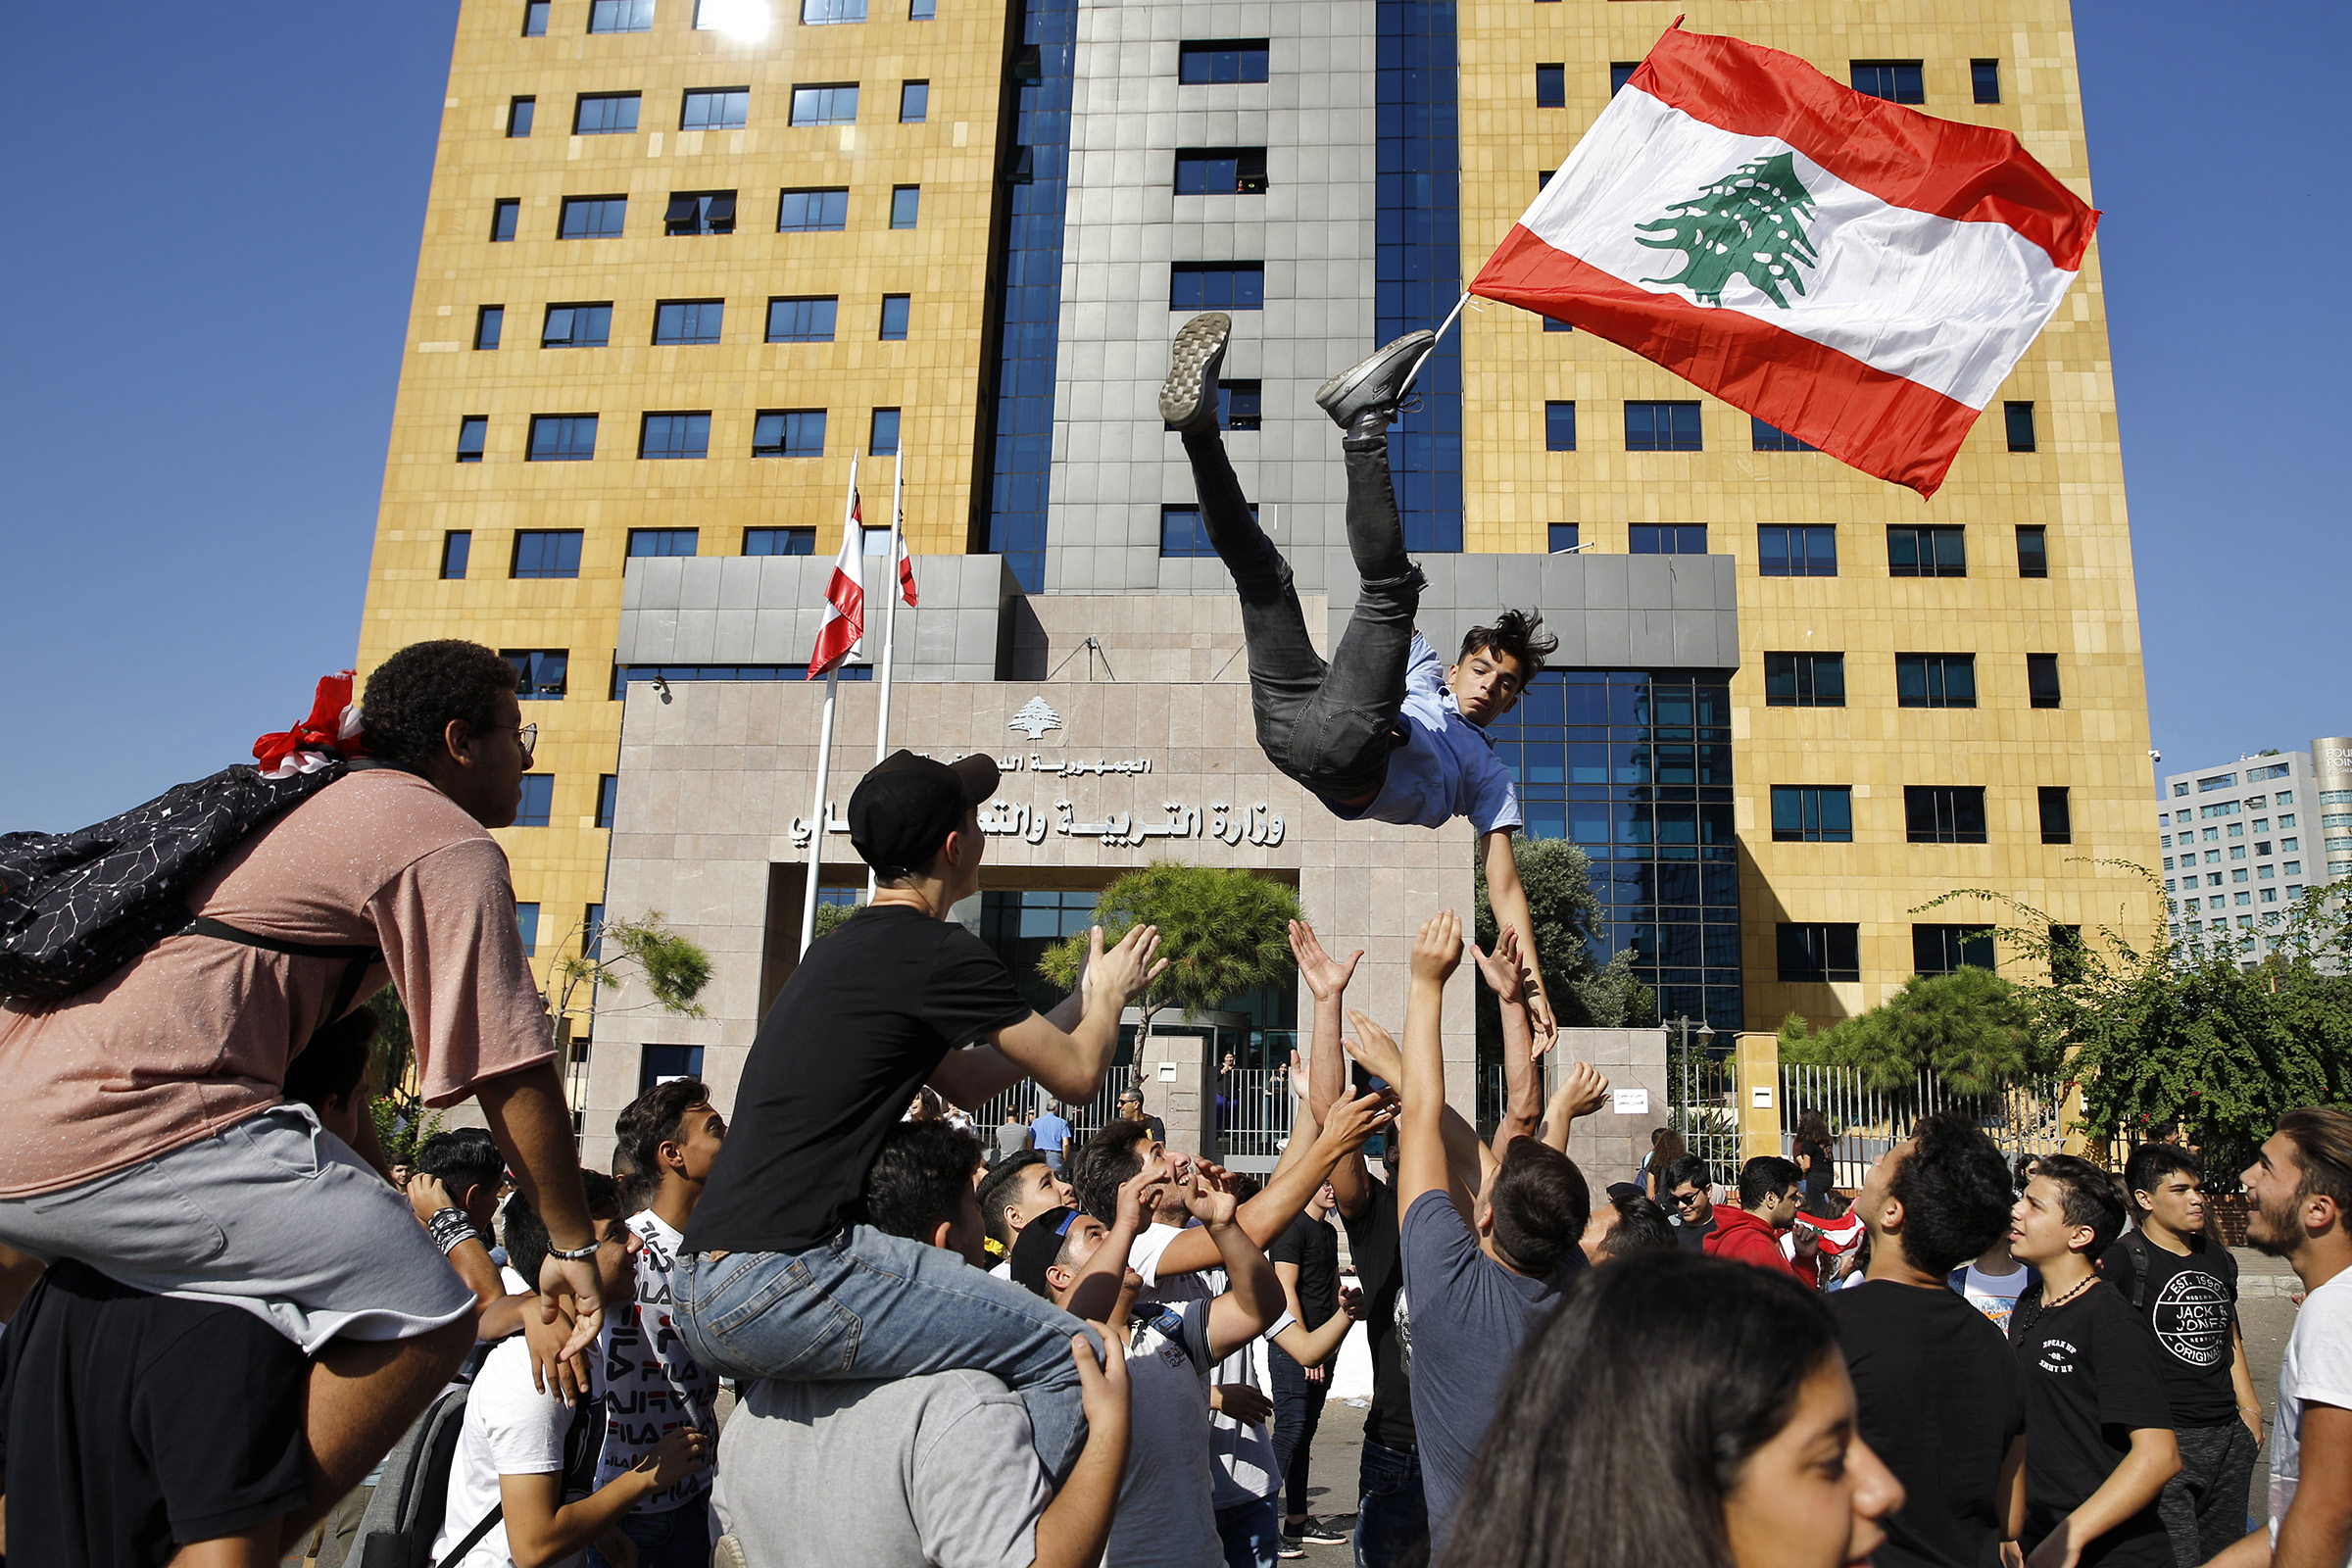 A student protester is thrown into the air by his colleagues as he holds a Lebanese flag during ongoing protests against the Lebanese government, in front of the education ministry in Beirut, Lebanon, on Nov. 12, 2019. (Bilal Hussein—AP)